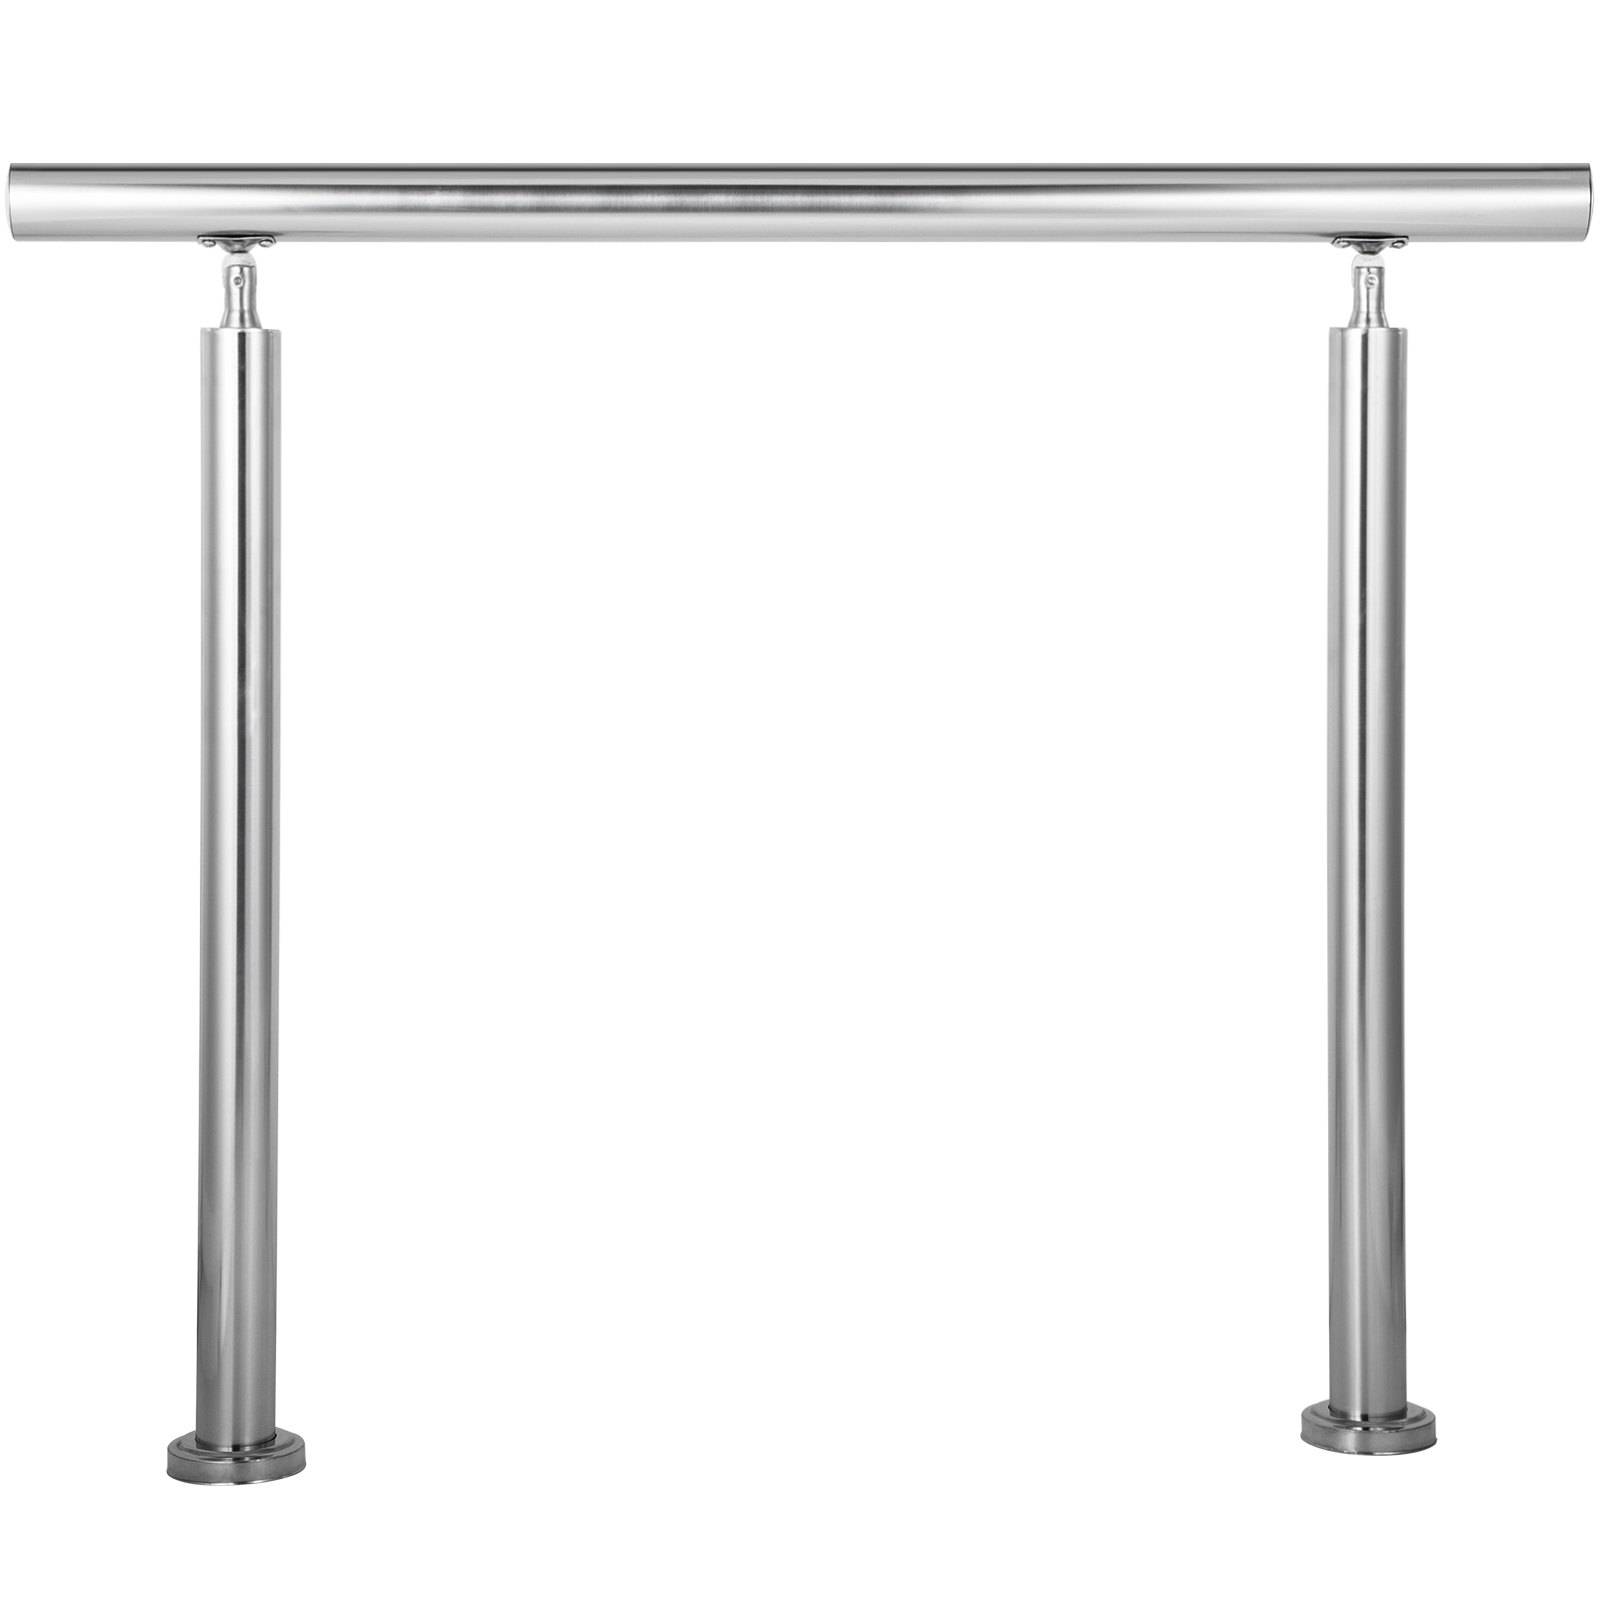 VEVOR Stainless Steel Handrail 551LBS Load Handrail for Outdoor Steps ...